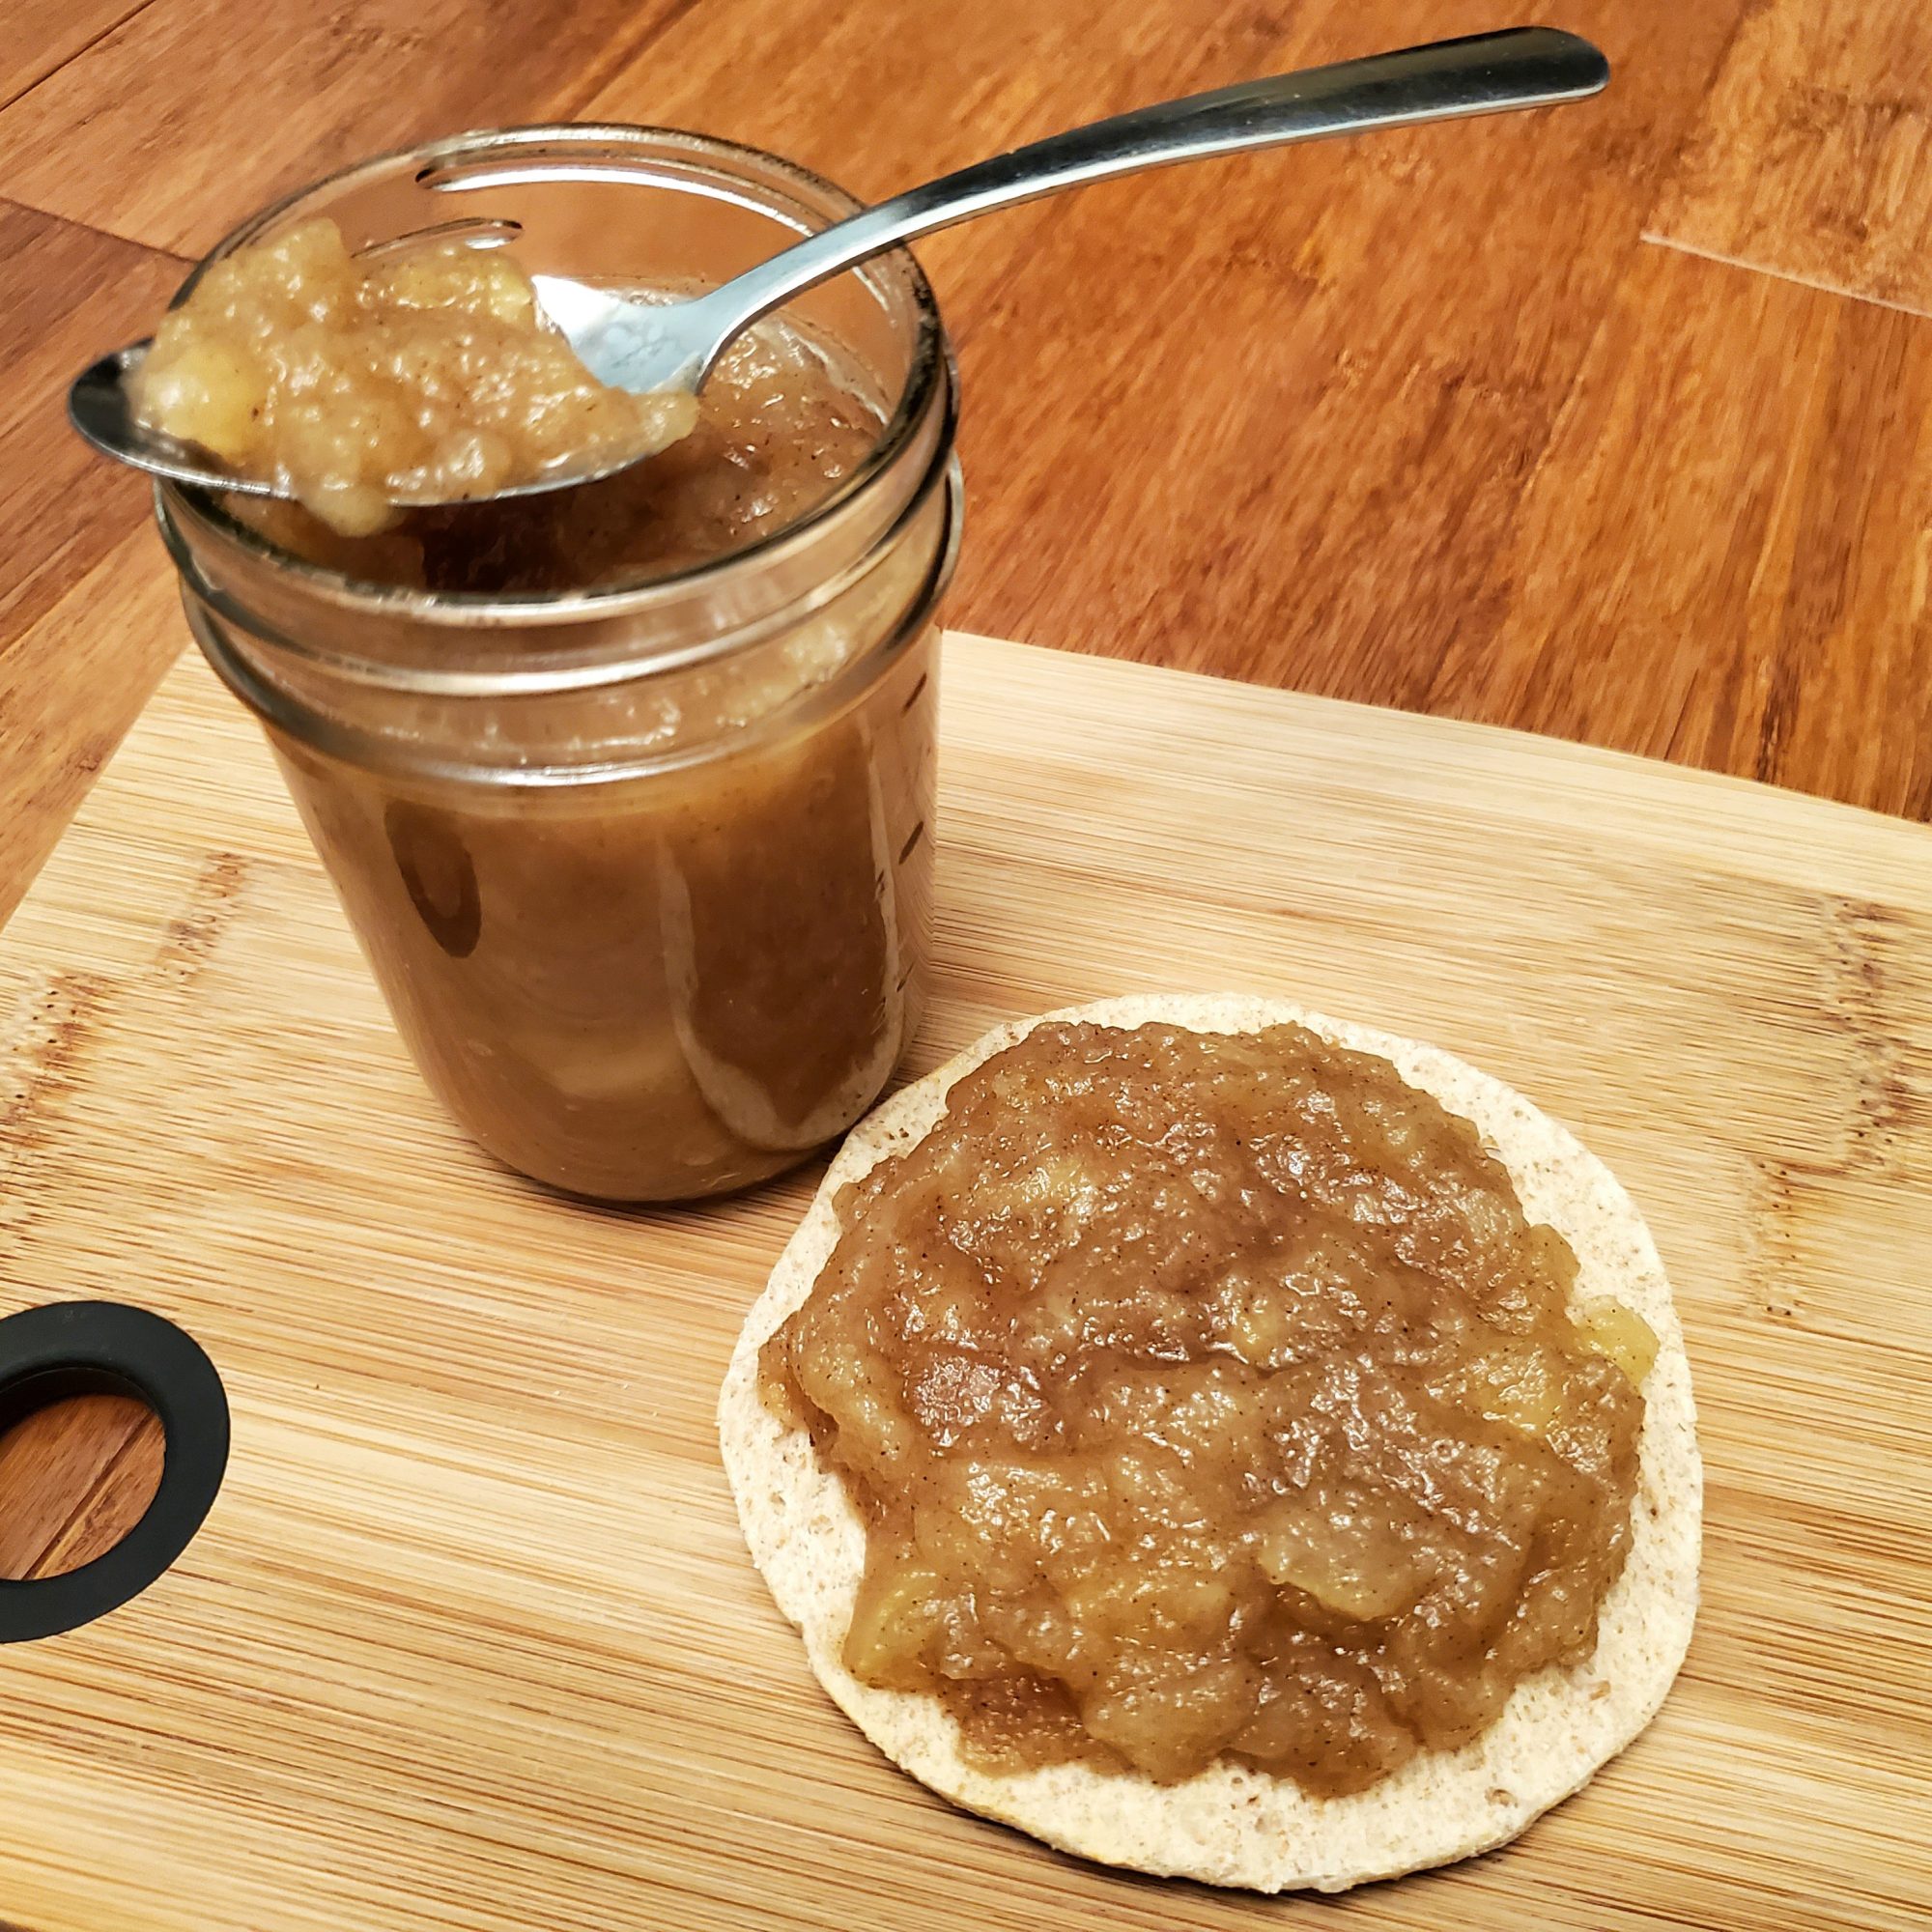 Apple Butter in jar and on bread